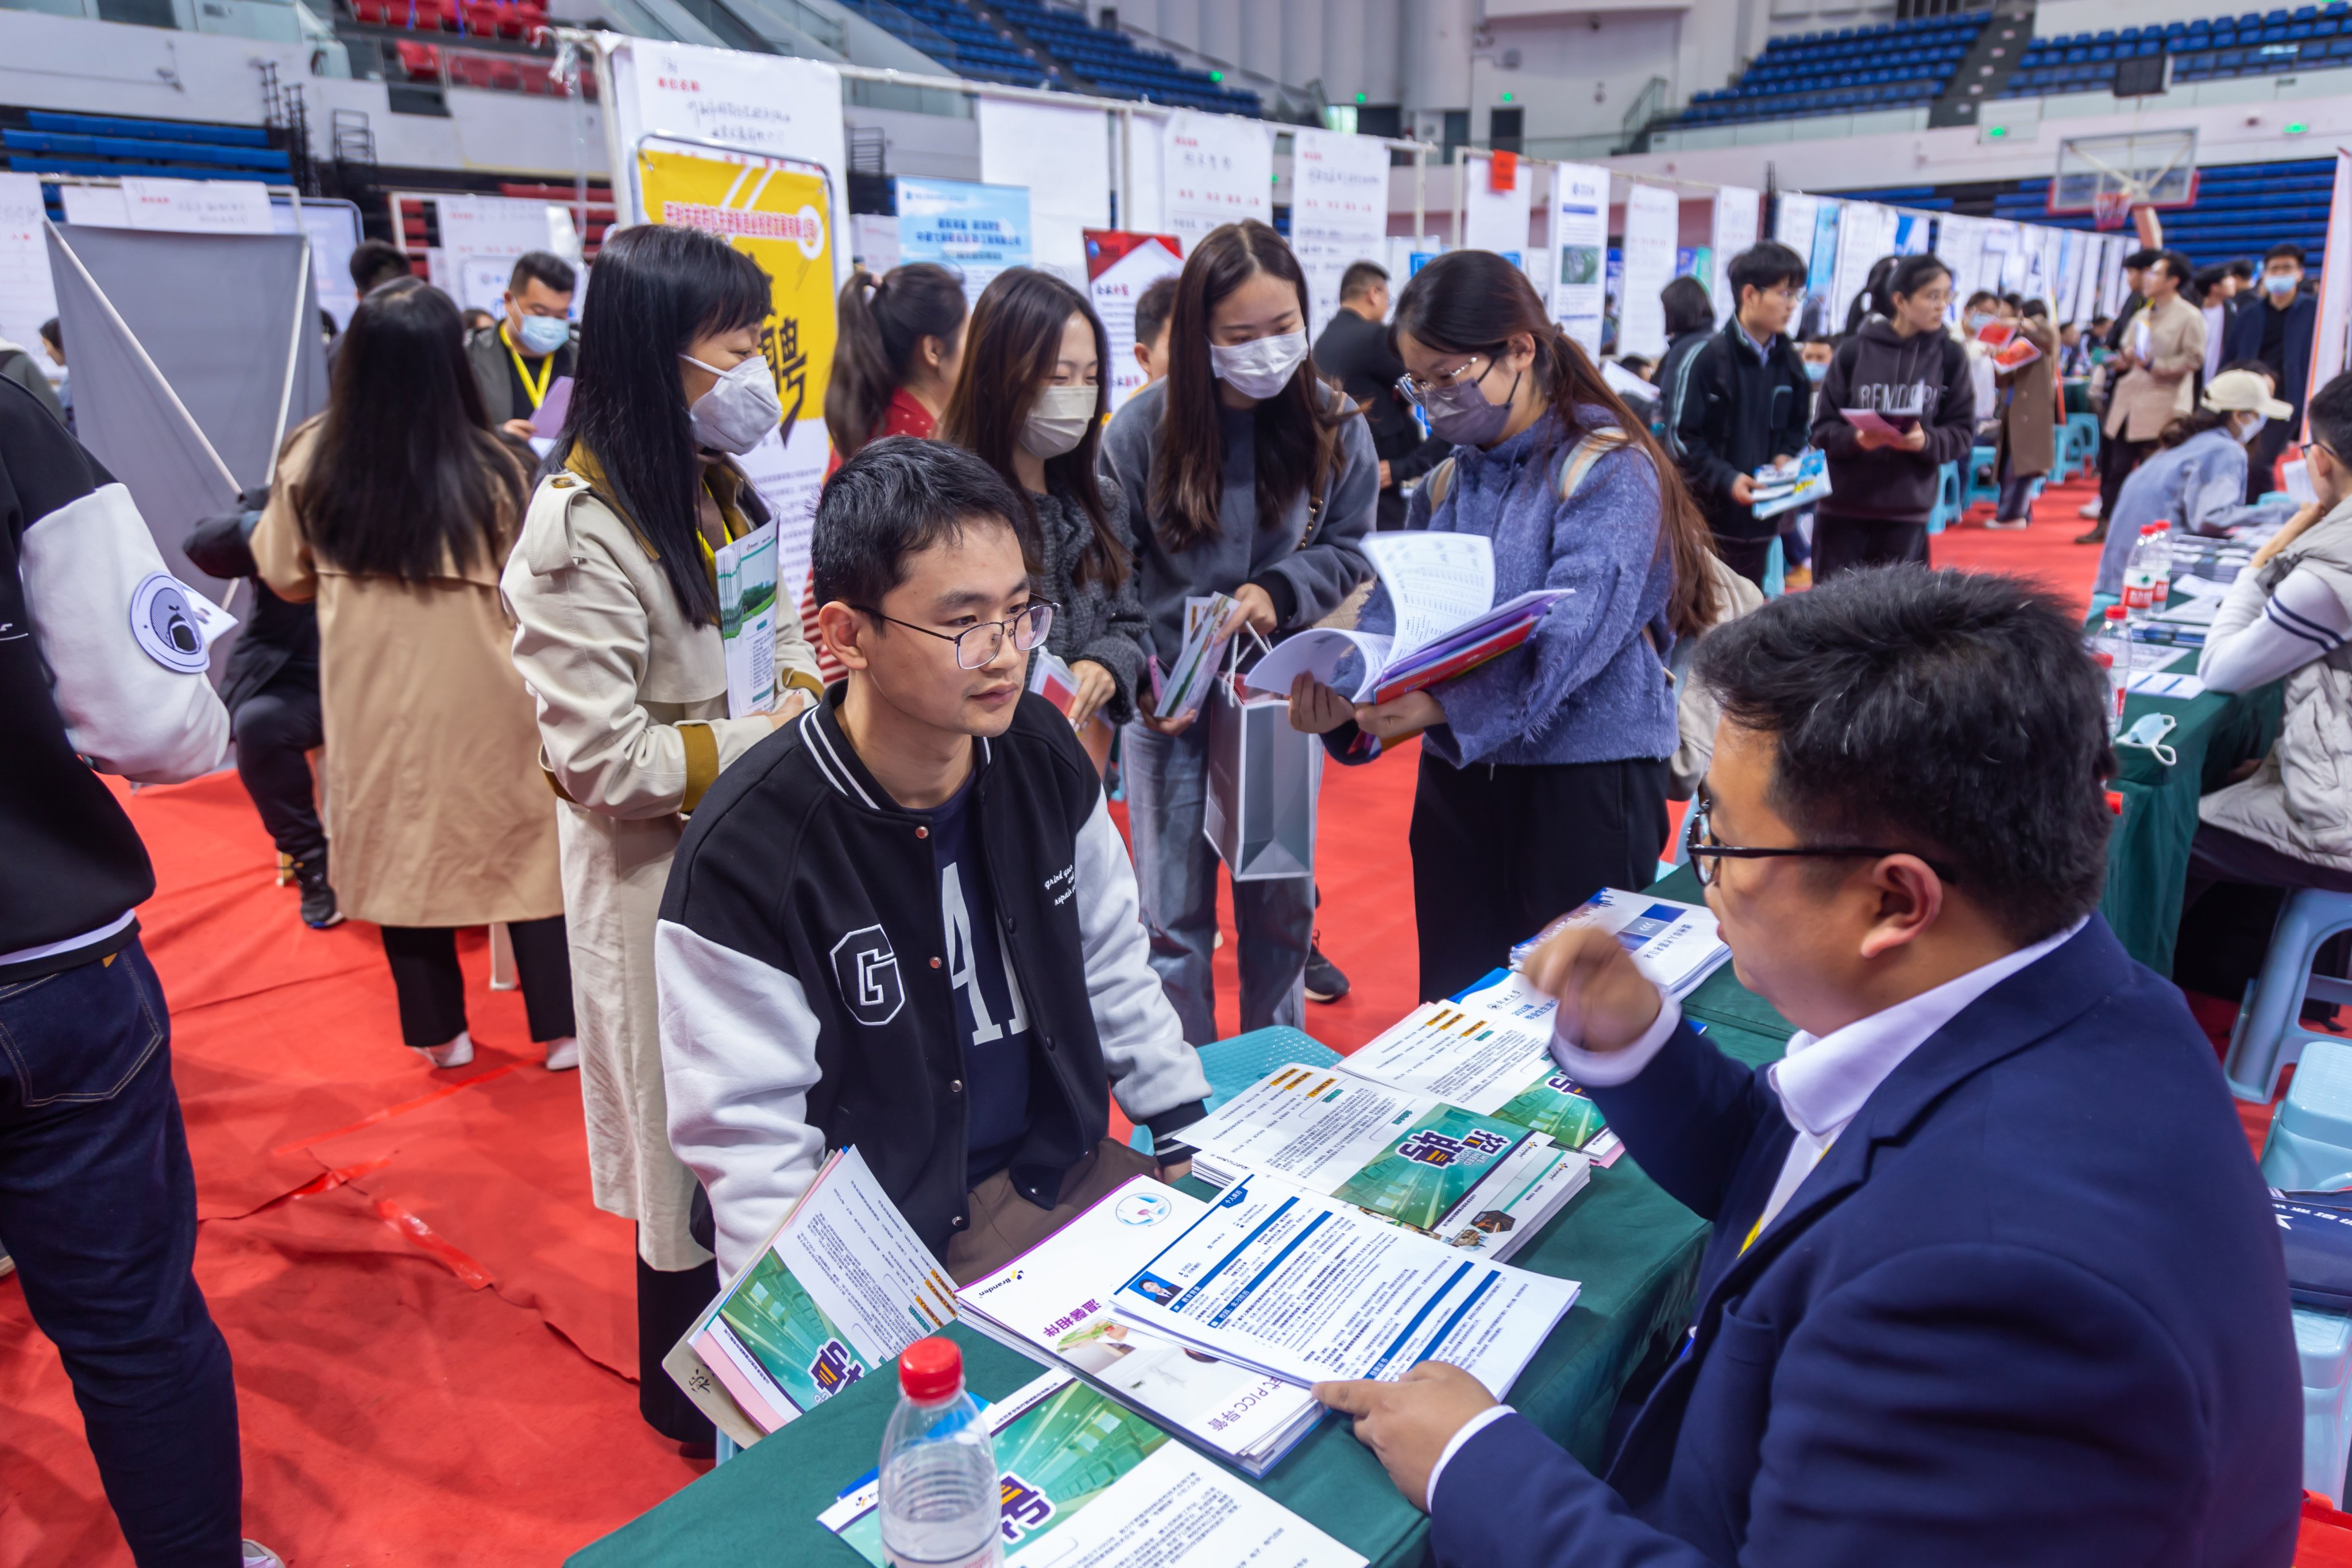 Graduates attend a job fair at Zhengzhou University in Henan province, China, on April 21. The number of jobless youth is likely to increase in June, when 11.6 million fresh graduates flood the market. Photo: Getty Images